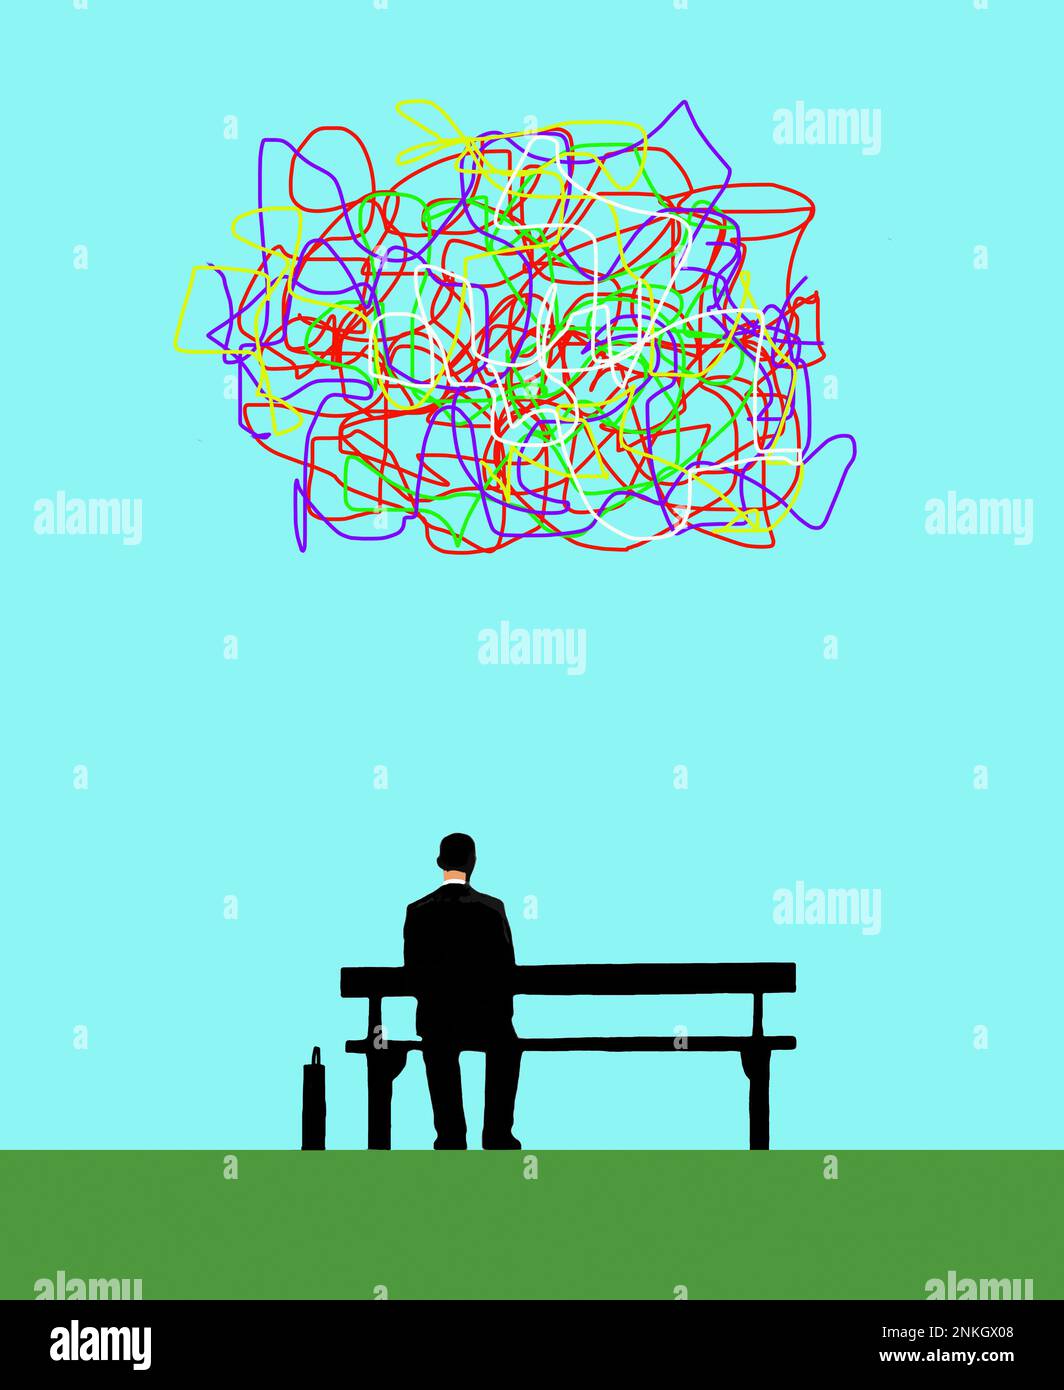 Illustration of businessman sitting under tangled lines representing confusion and anxiety Stock Photo